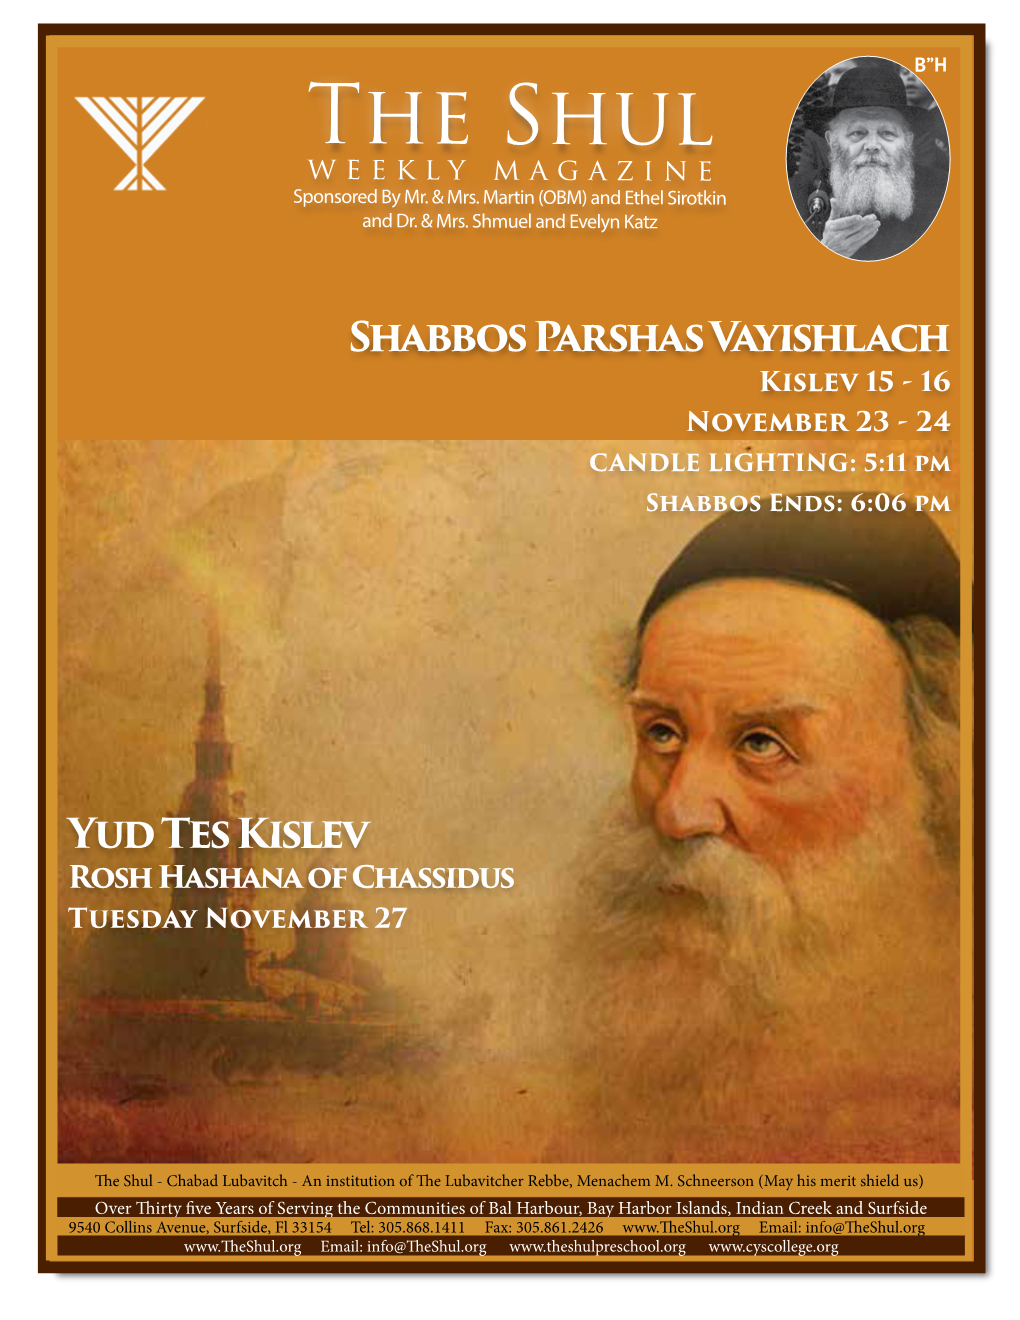 Shabbos Schedule Shalosh Seudos This Week: Candle Lighting 5:11 P.M